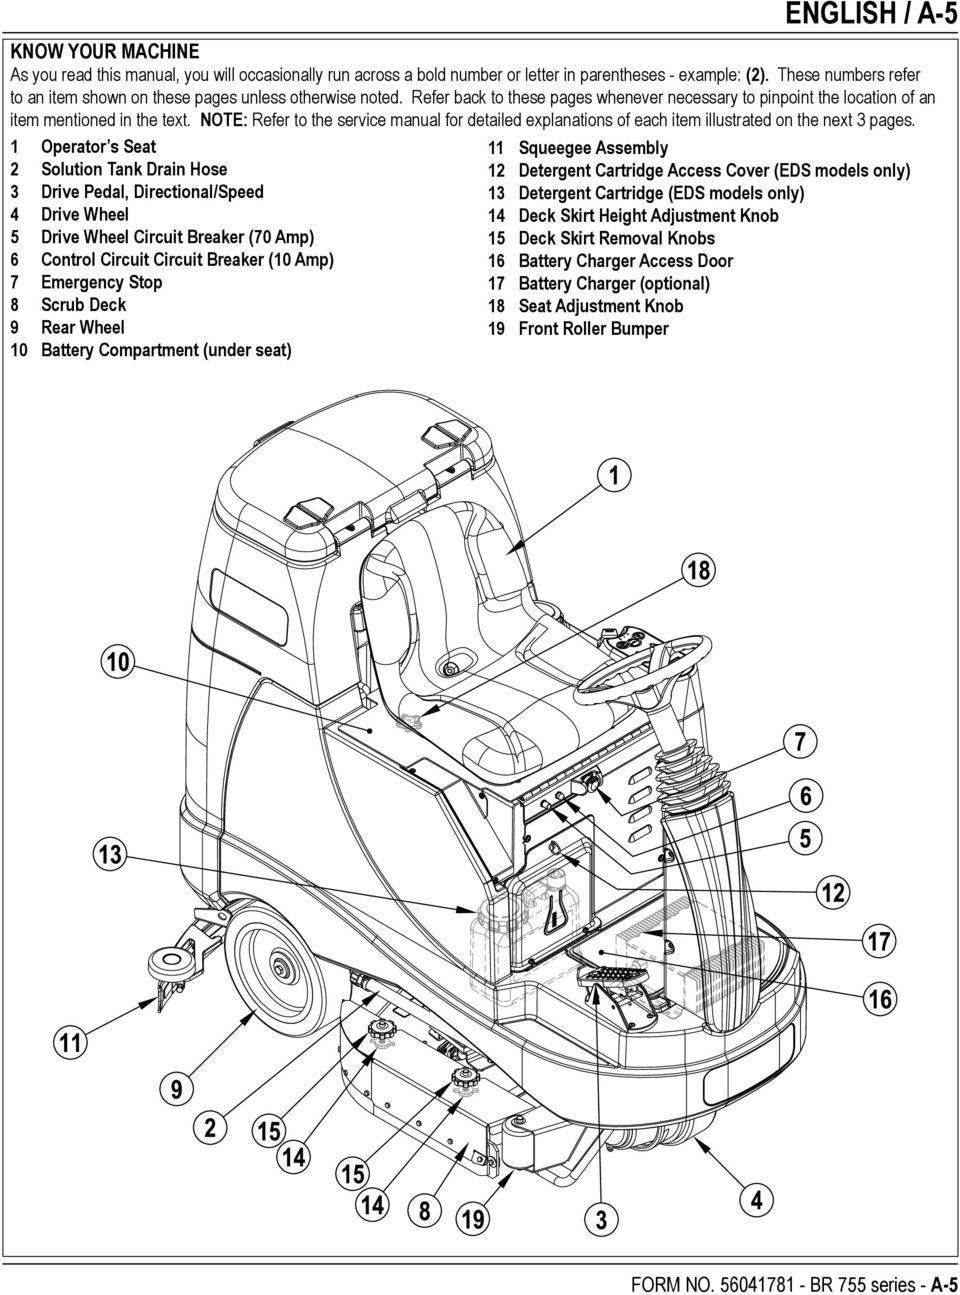 NOTE: Refer to the service manual for detailed explanations of each item illustrated on the next 3 pages.